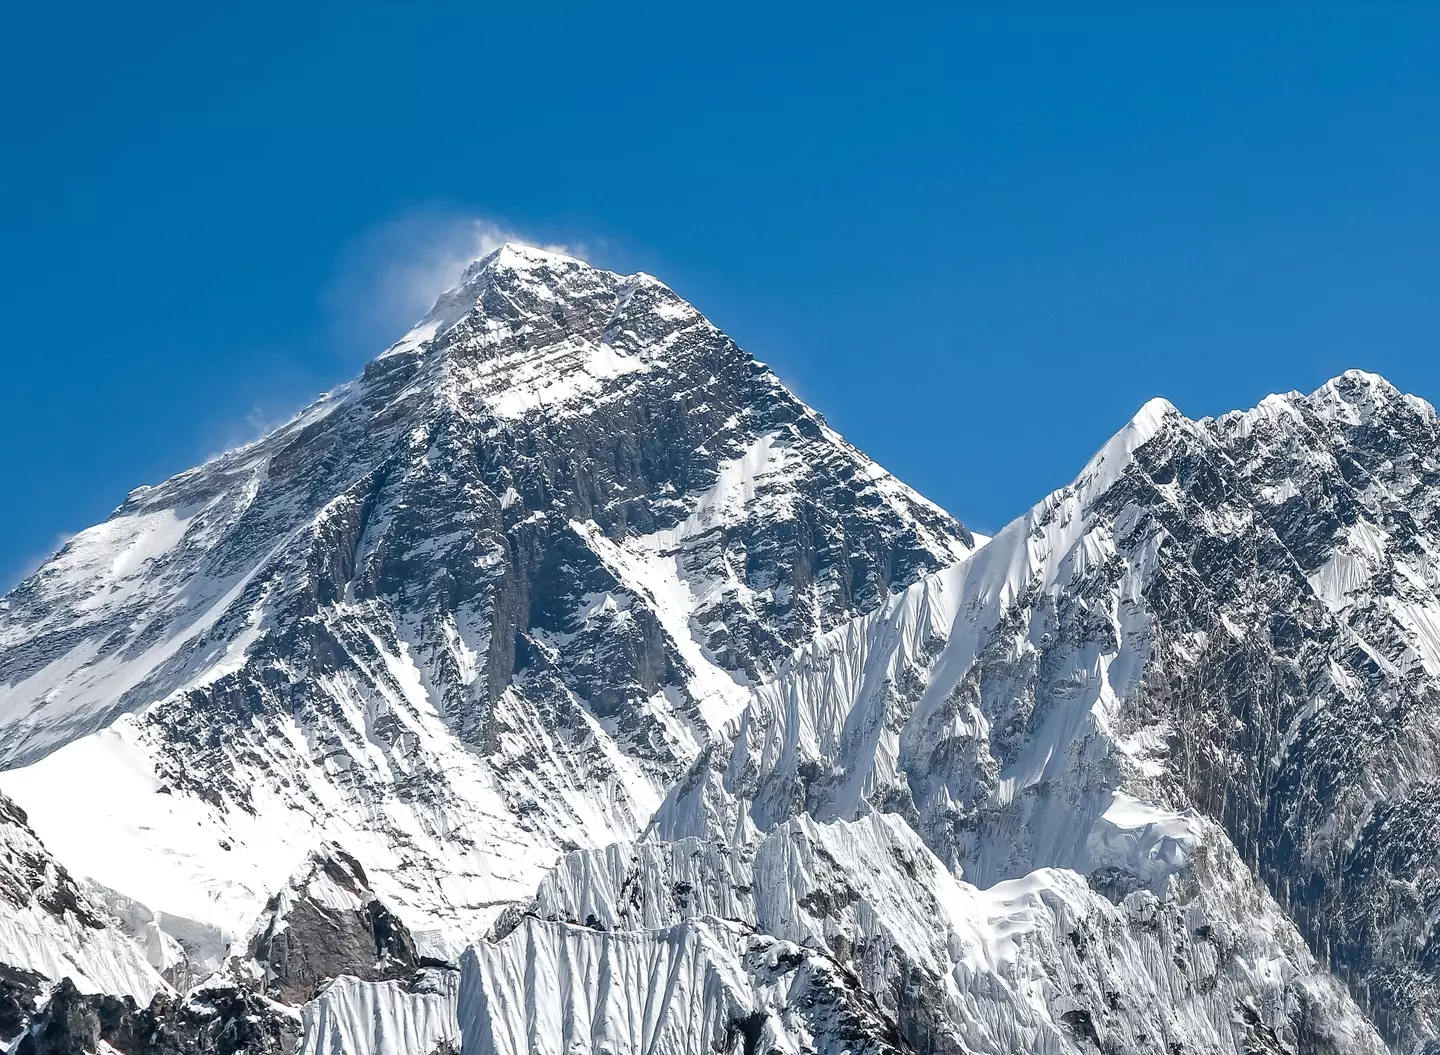 Hundreds of people have died attempting to summit Mount Everest.